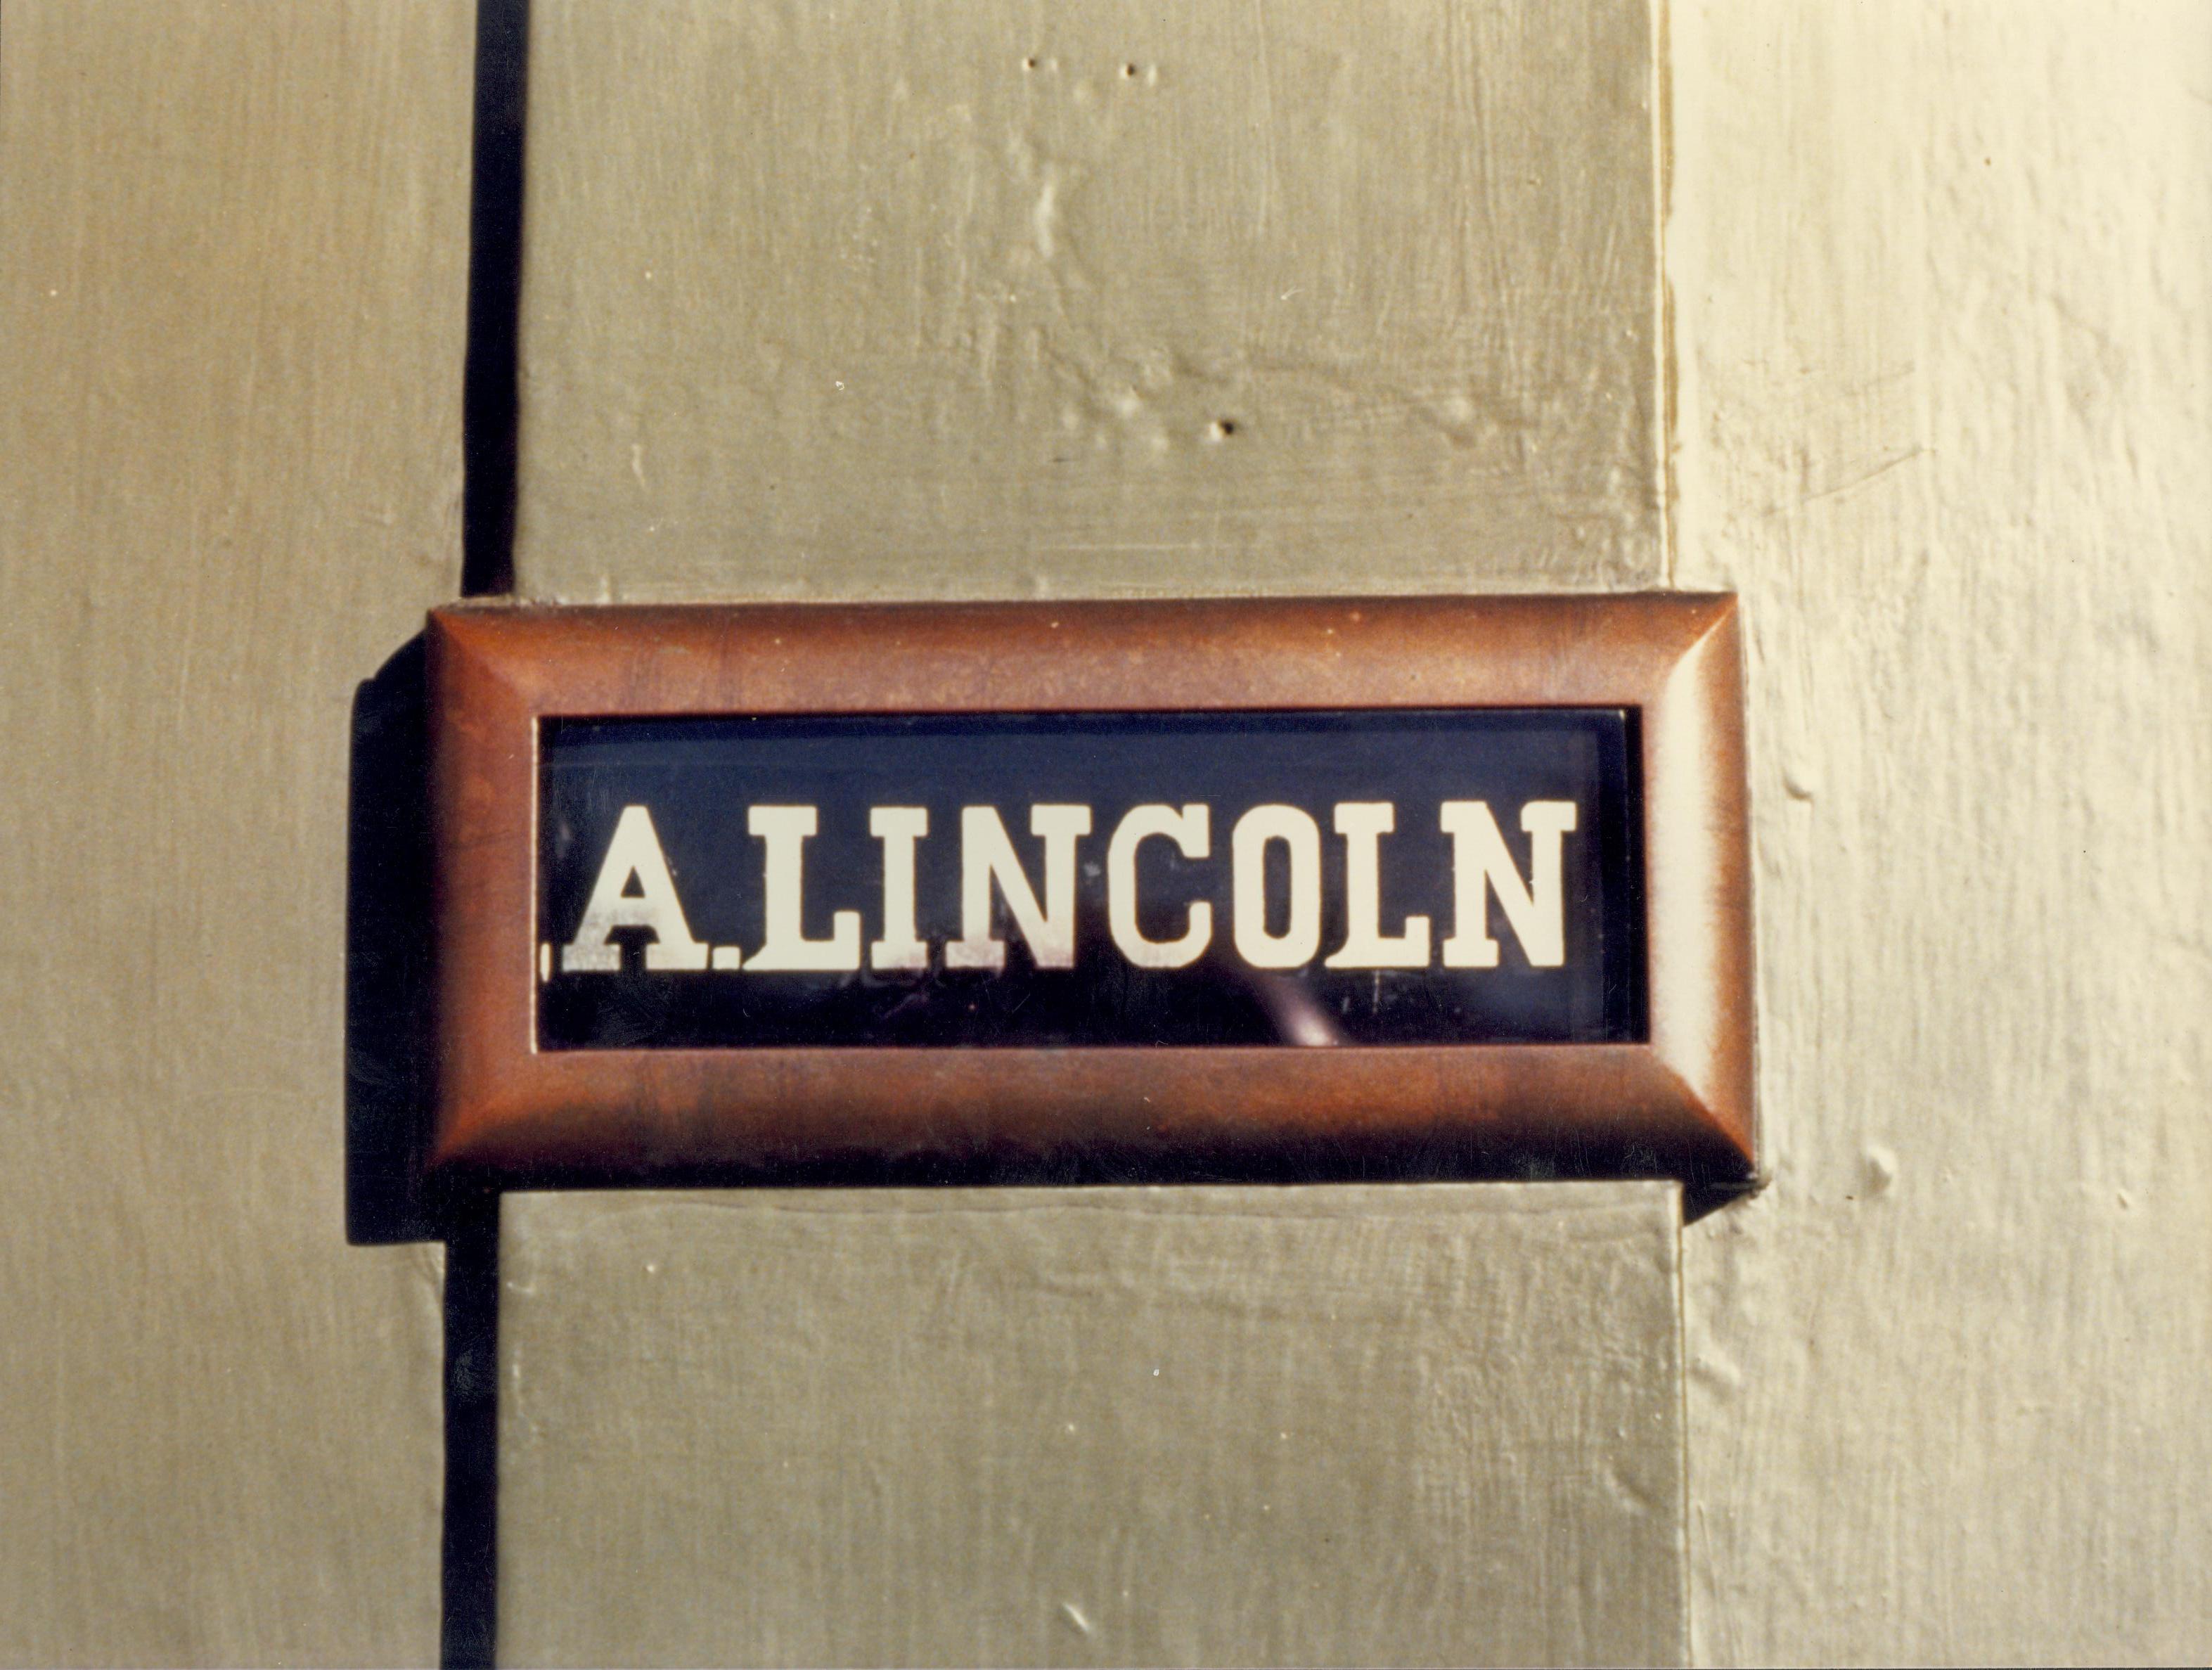 NA Lincoln, Home, front, door, name, plate